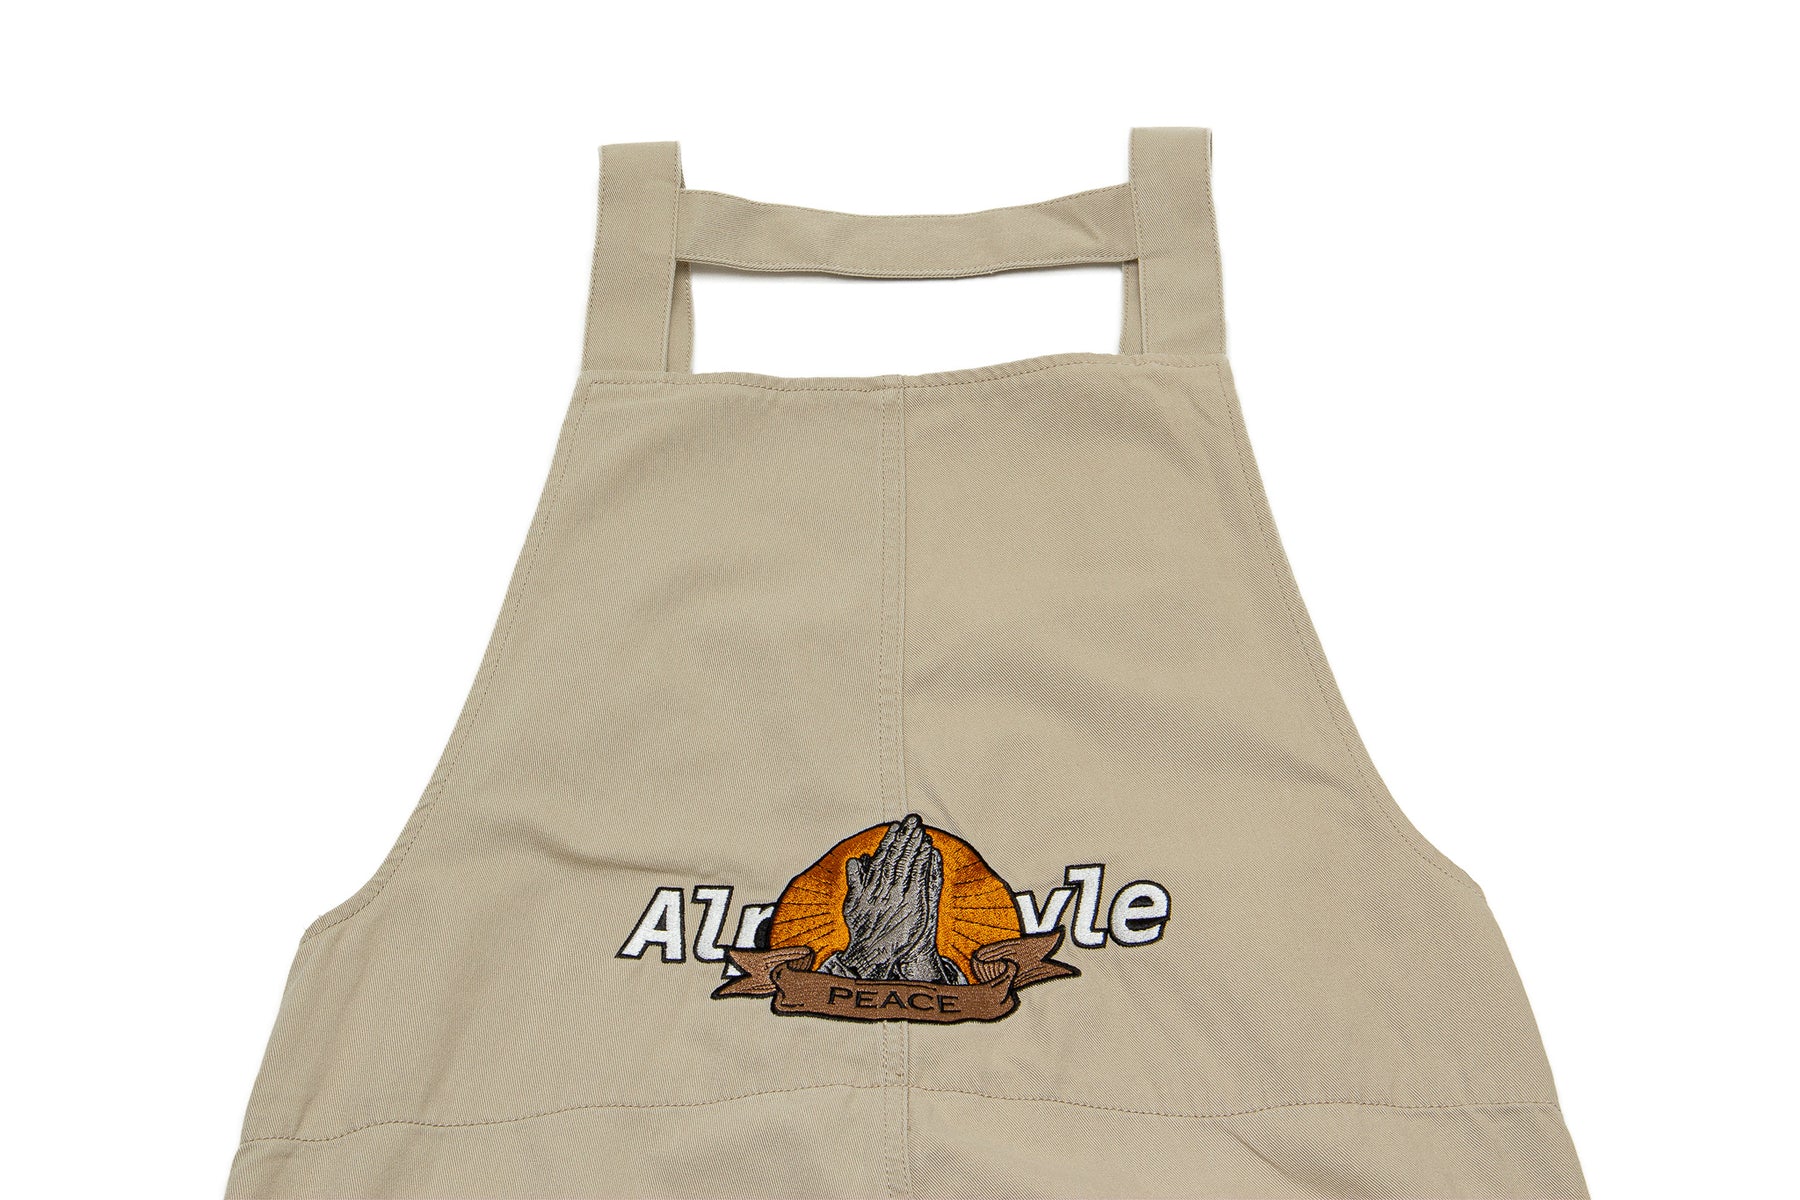 Alpha Style Lucas Working Overall "Khaki"